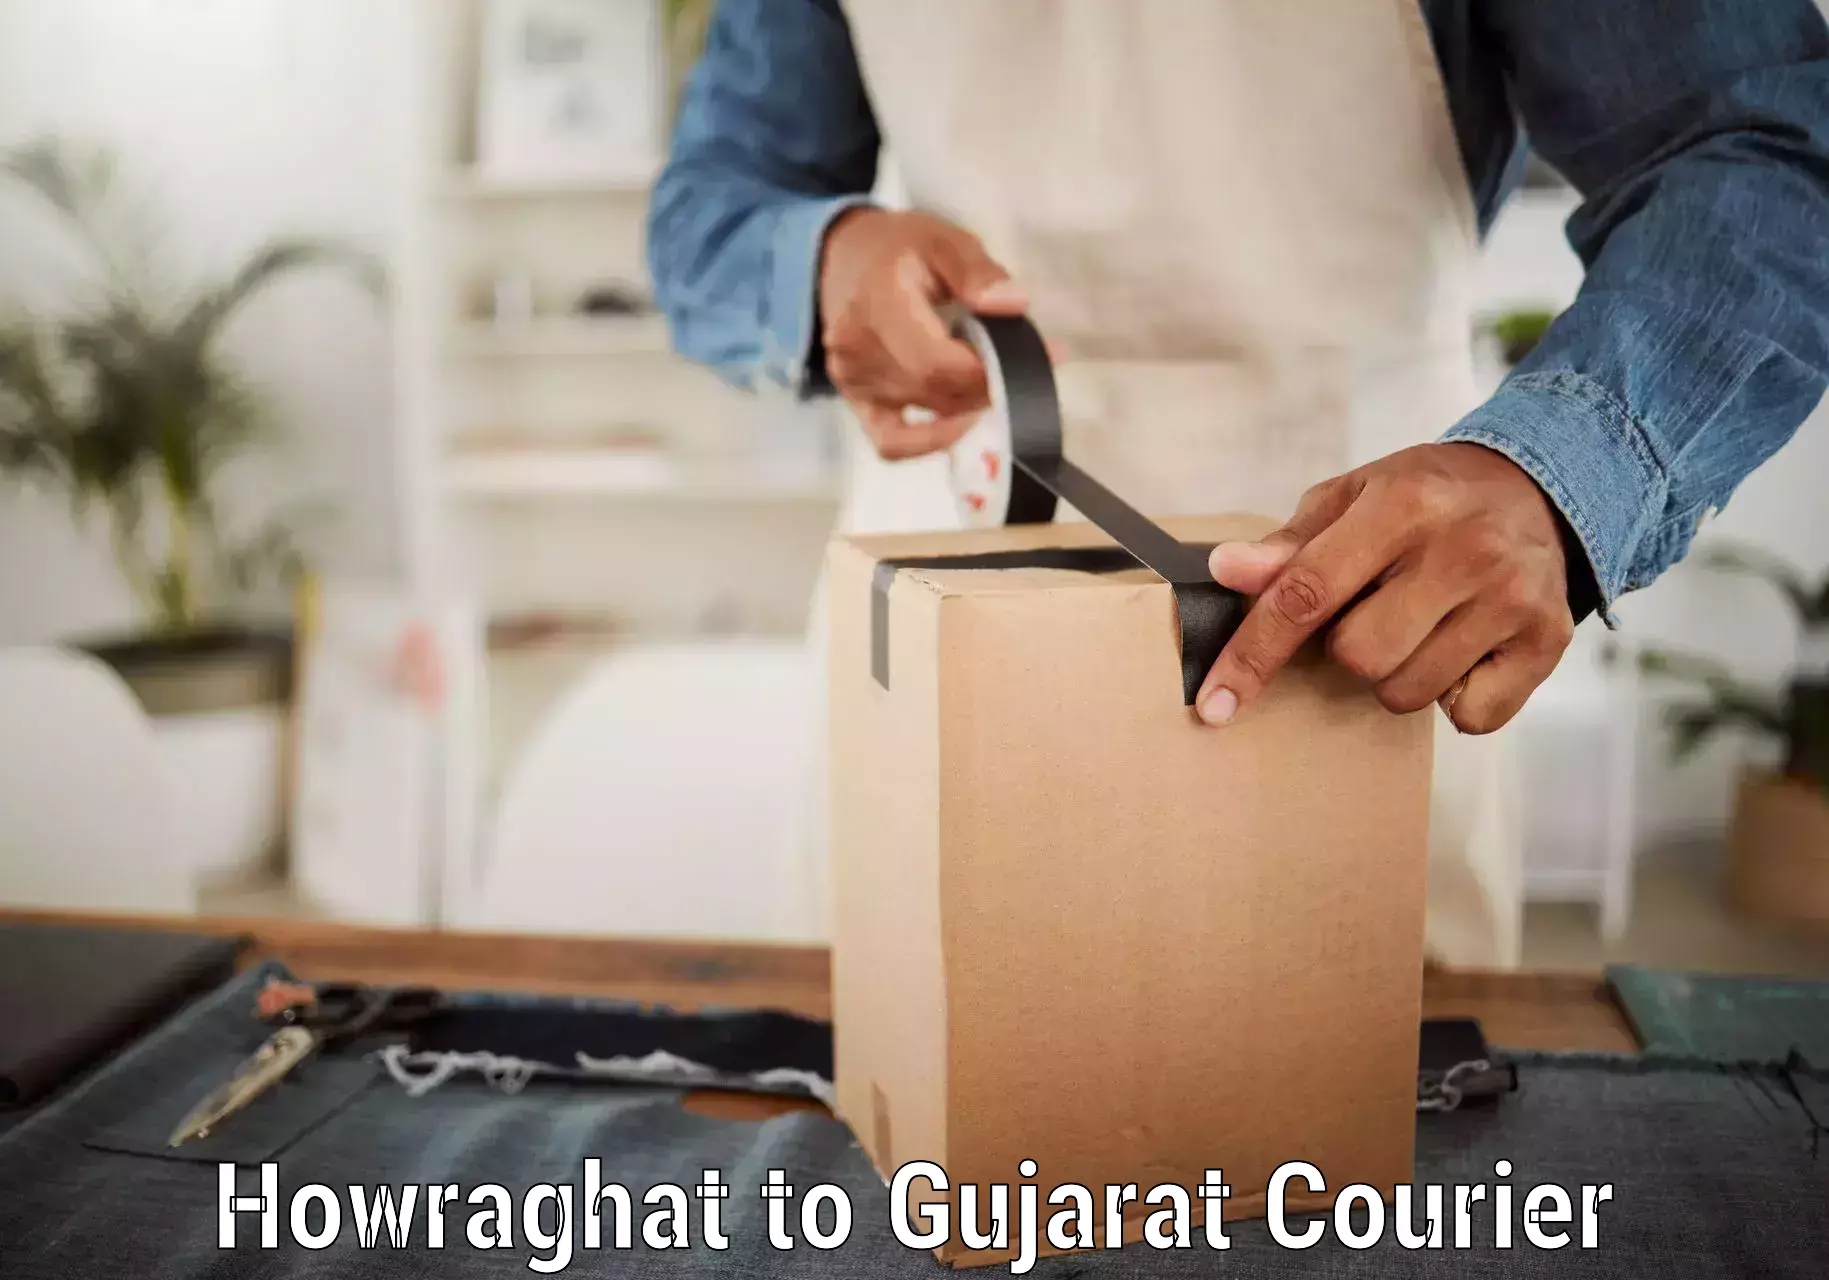 Postal and courier services Howraghat to Dabhoi